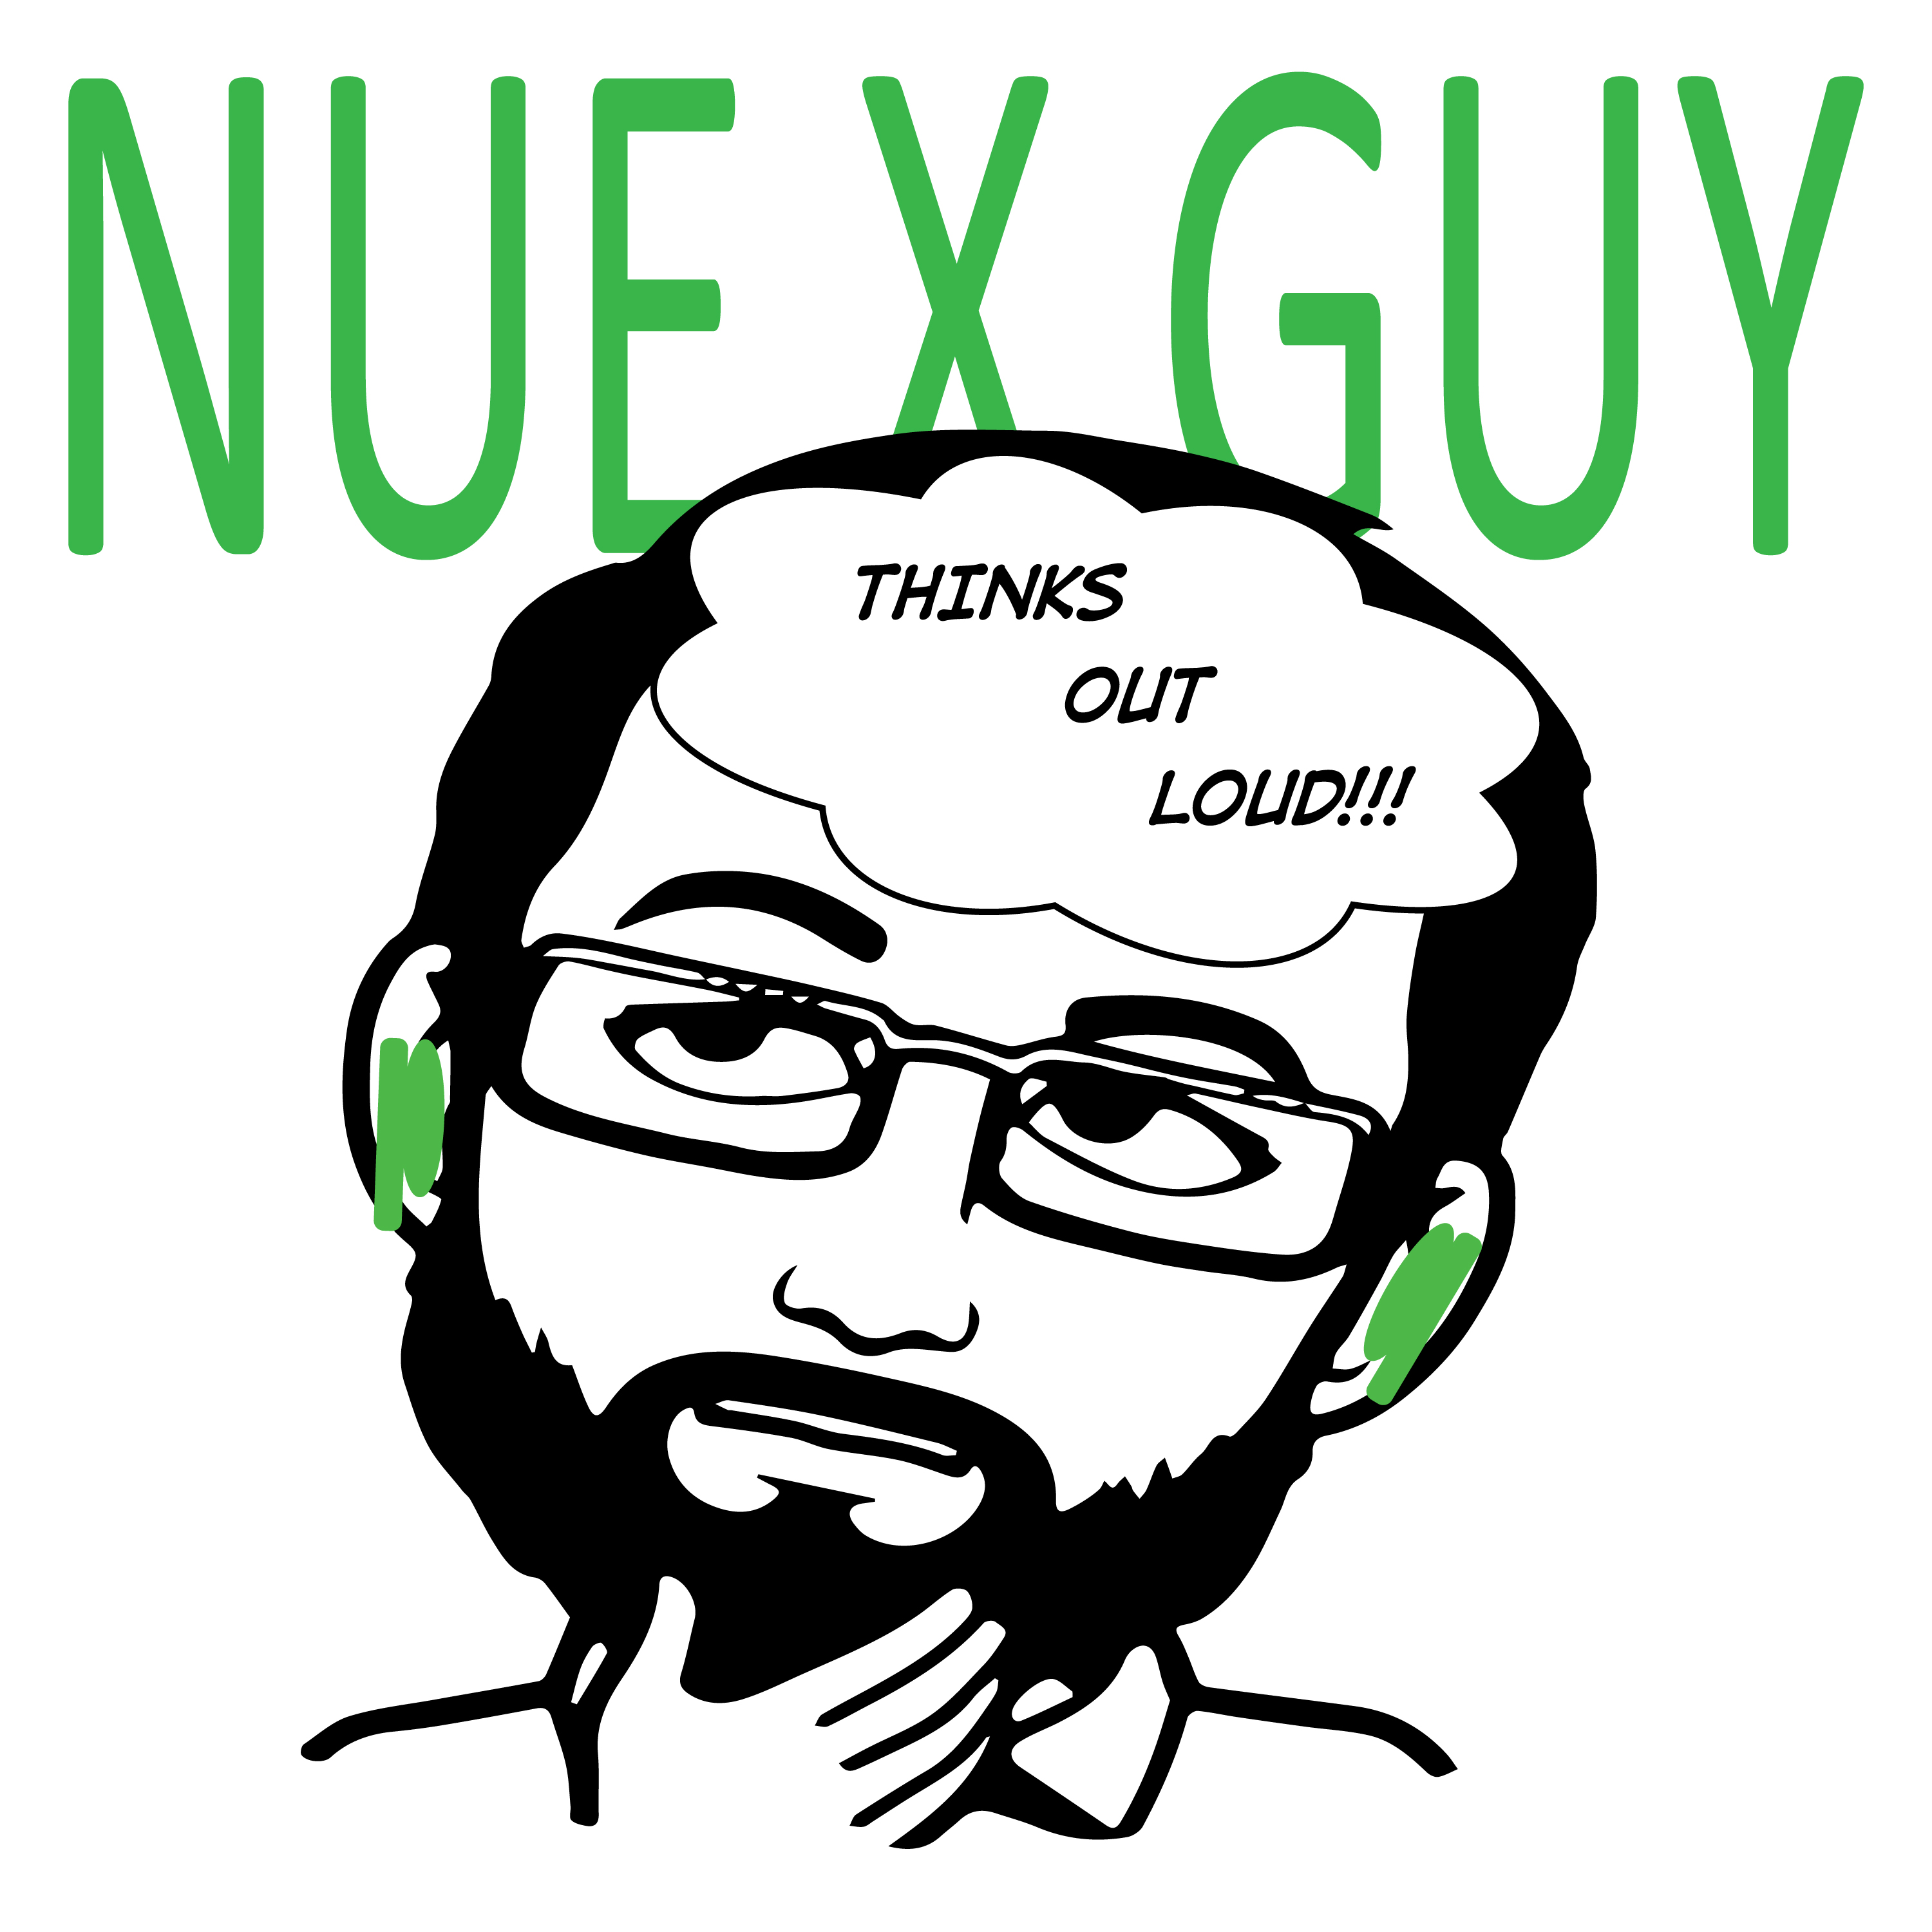 NUEXGUY Thinks Out Loud